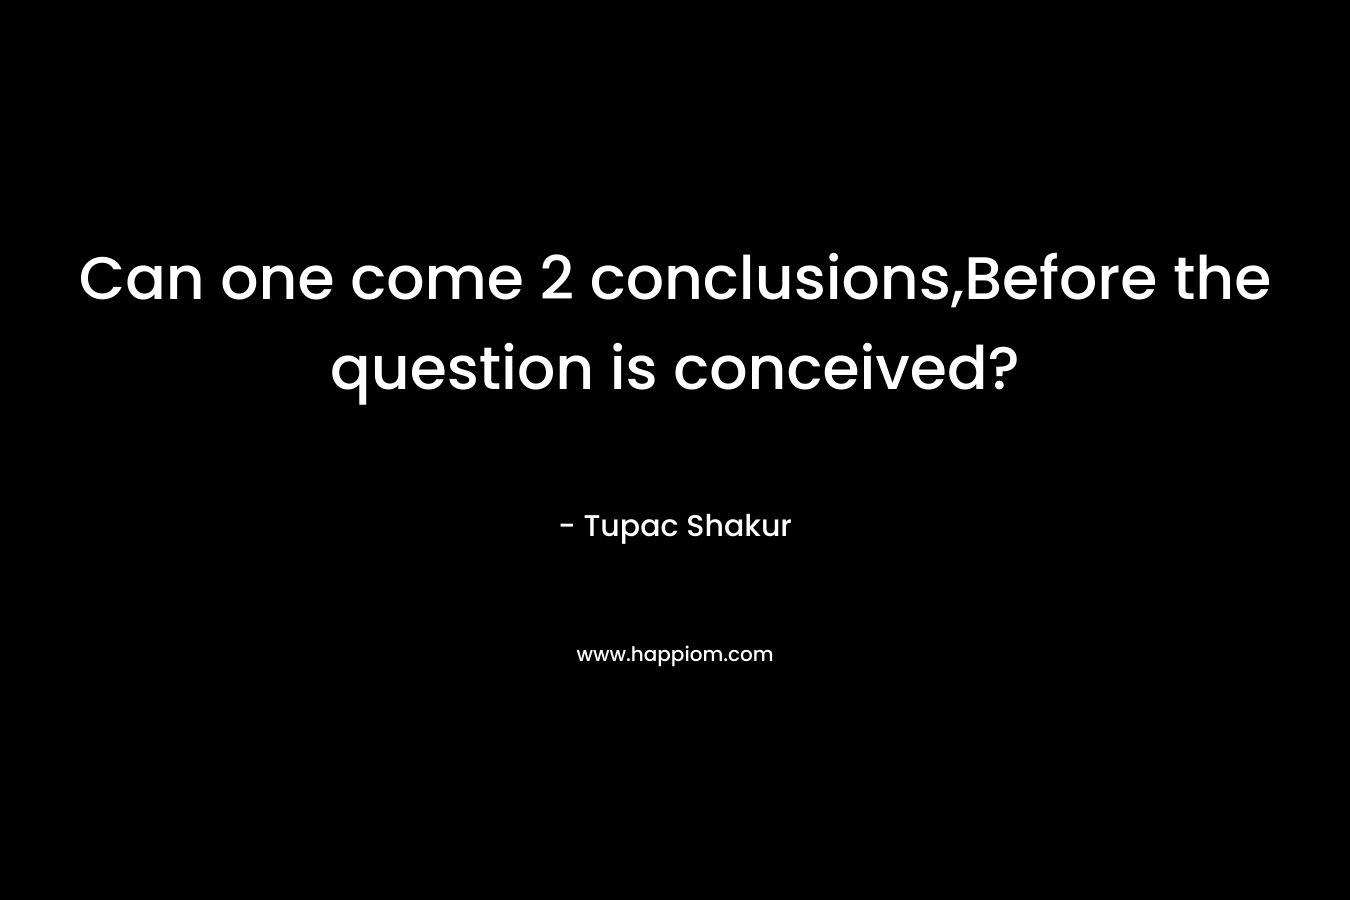 Can one come 2 conclusions,Before the question is conceived? – Tupac Shakur